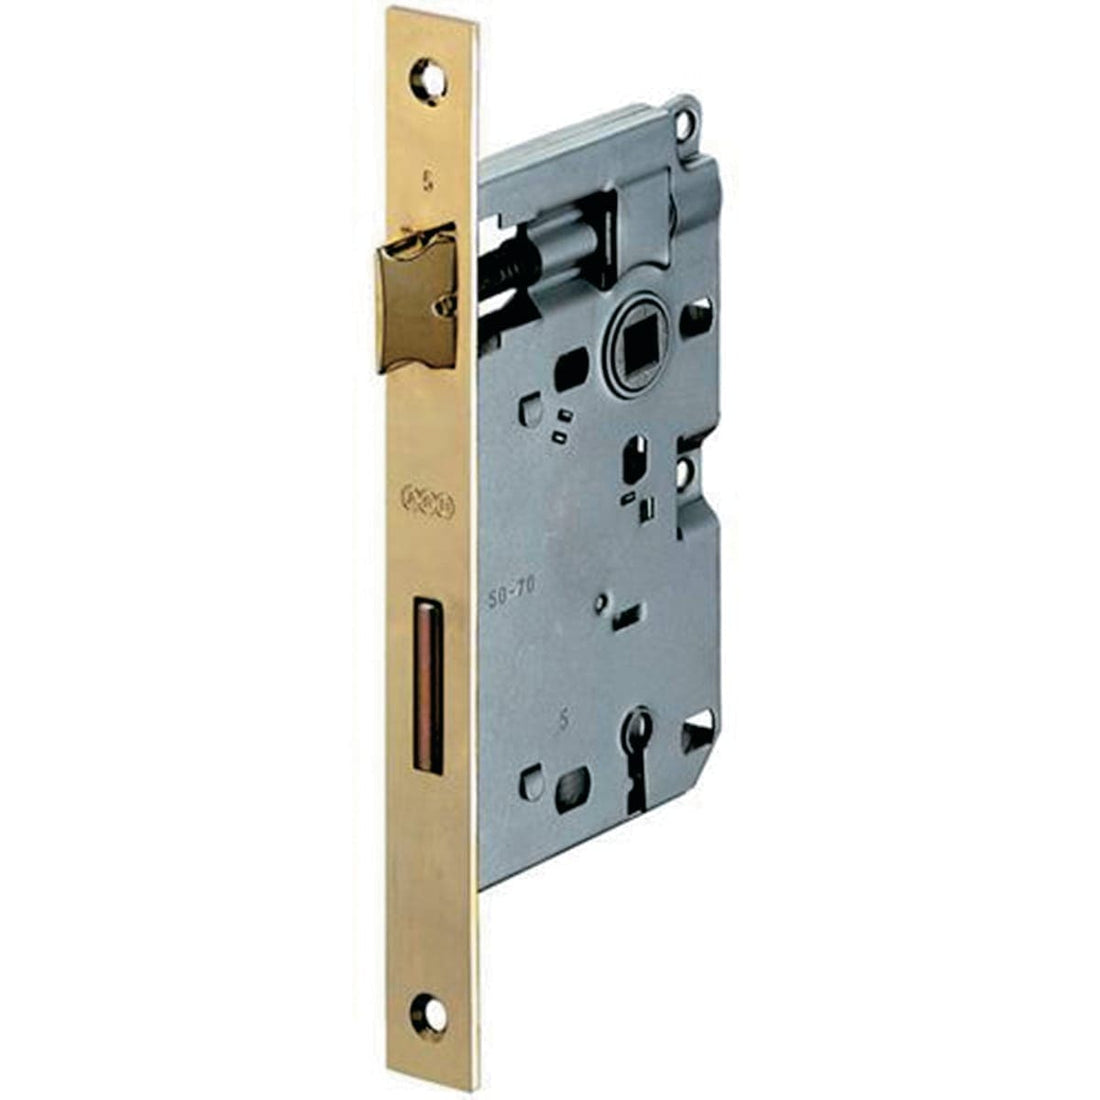 PATENT LOCK CENTRE DISTANCE 70 MM ENTRY 50 MM SQUARE EDGE PAINTED BRASS